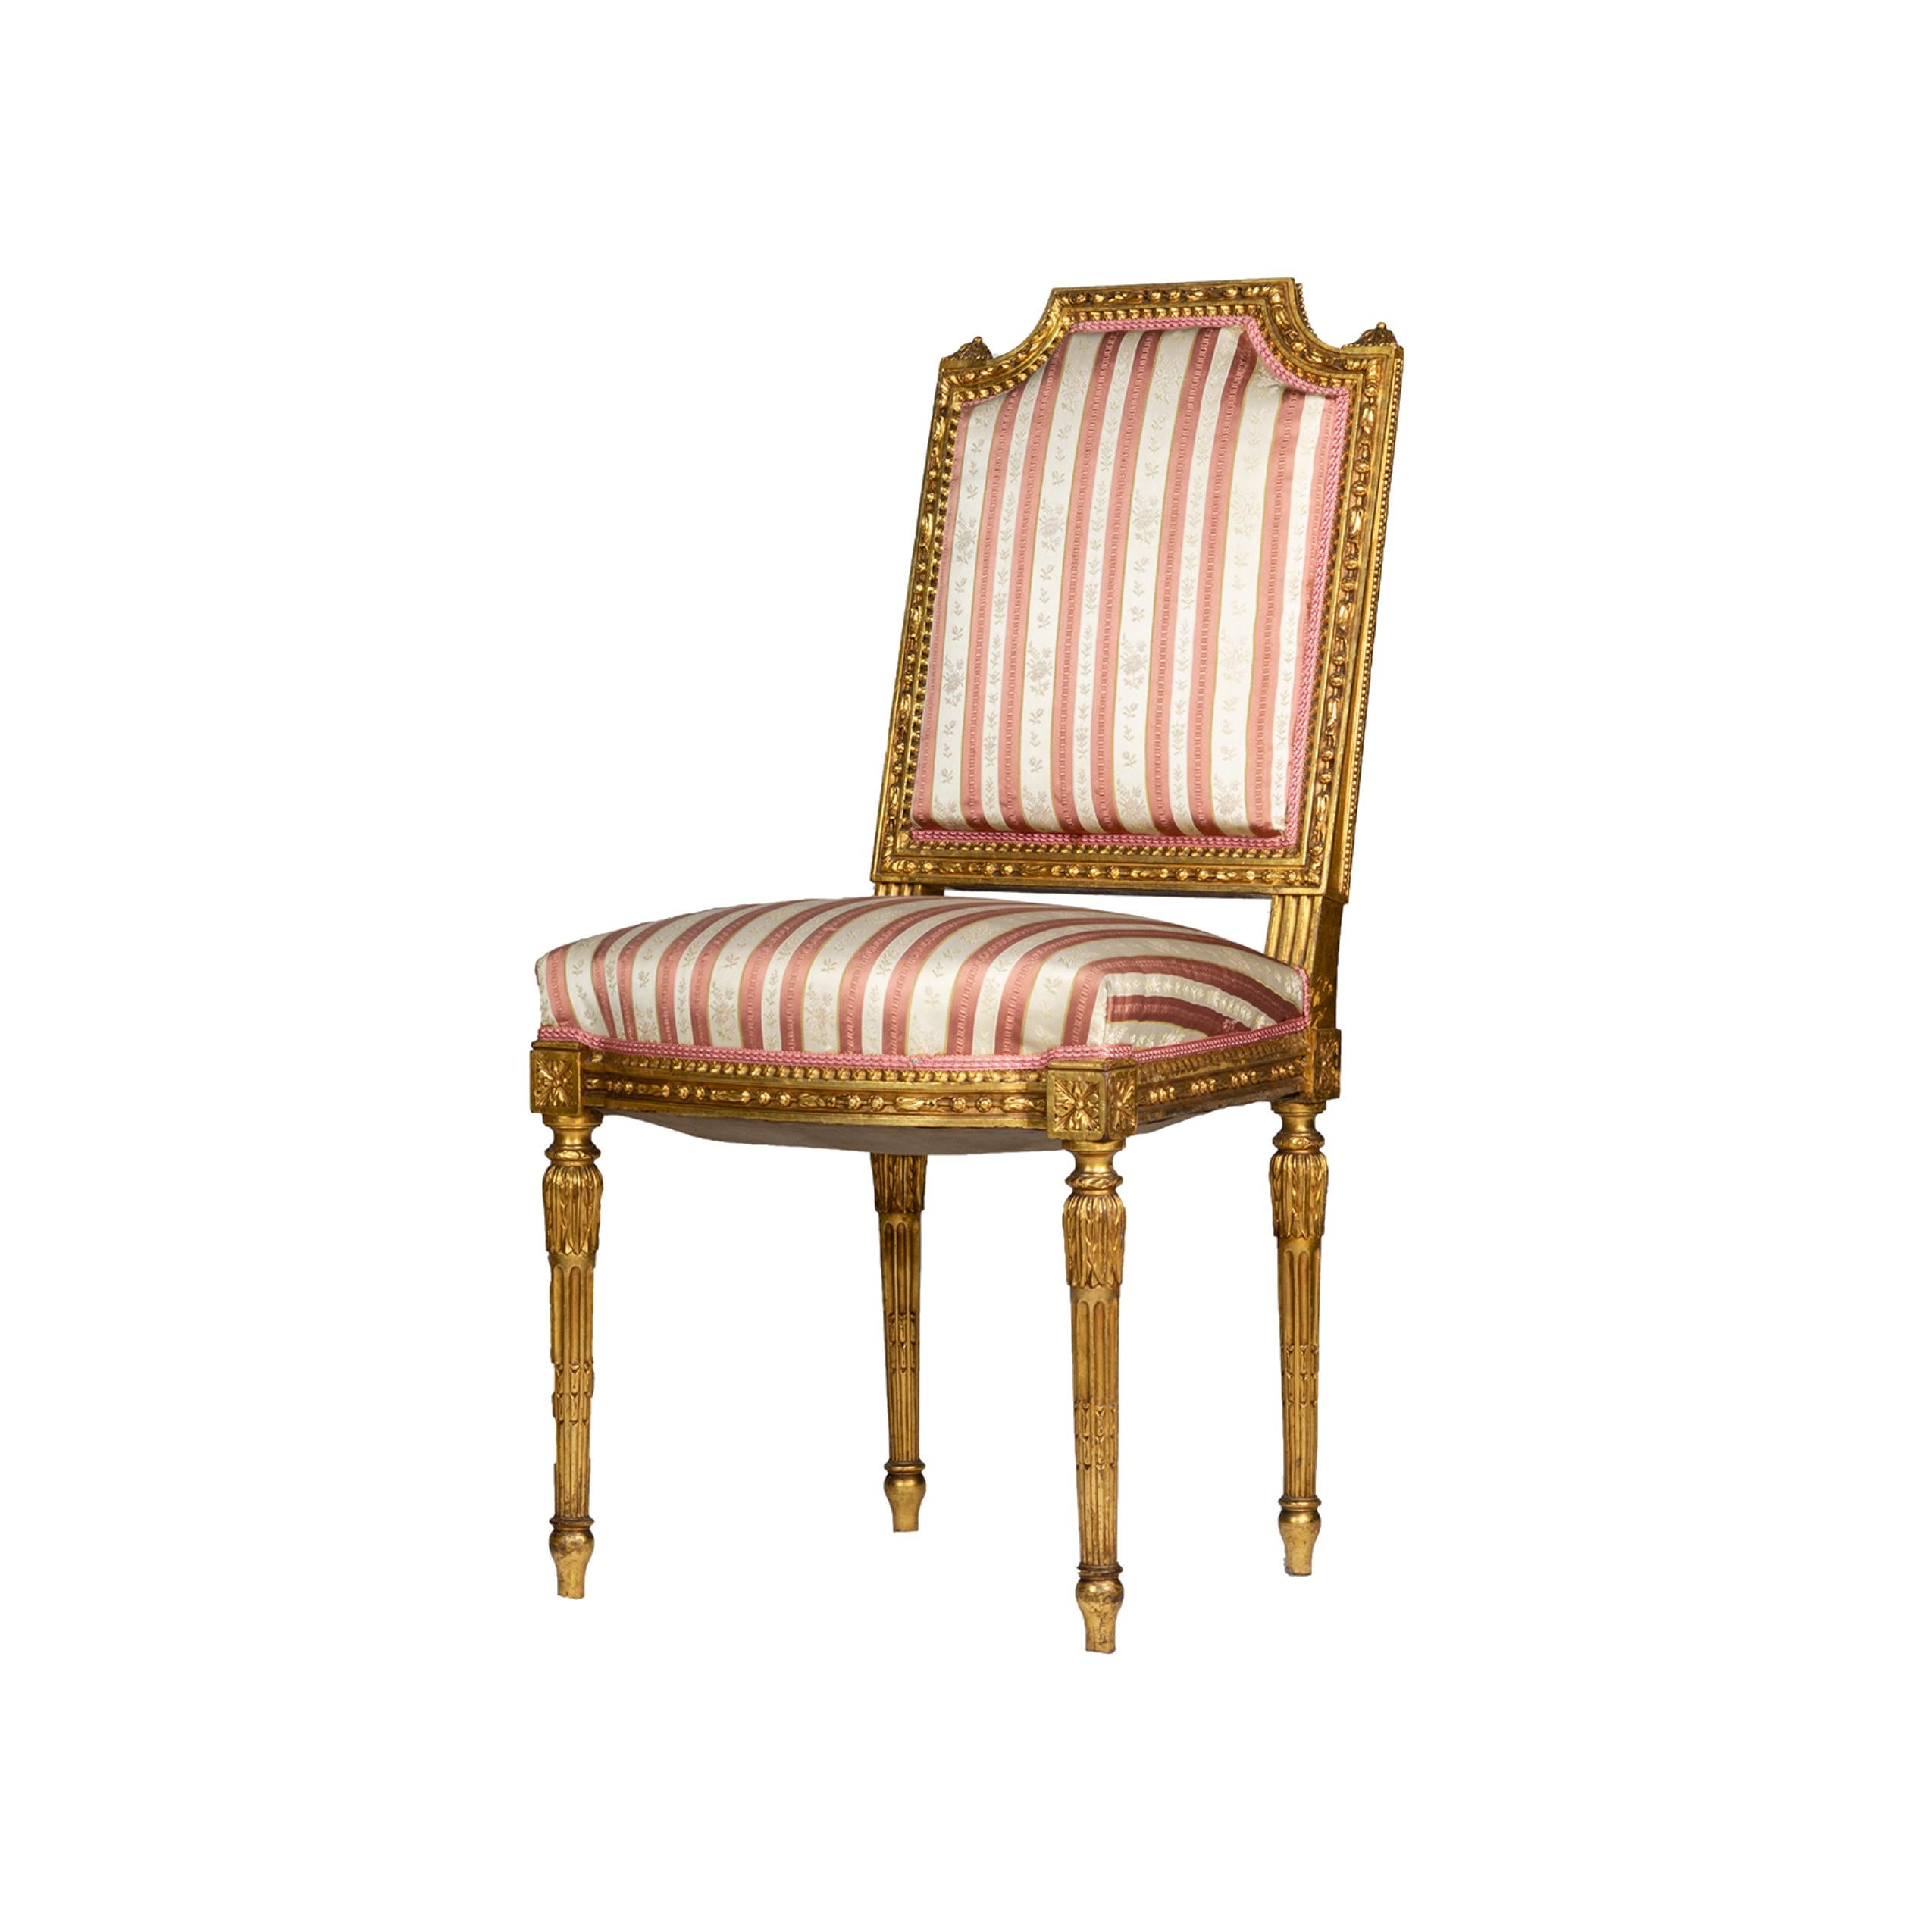 A pair of French Louis XVI style chairs offer giltwood frames with upholstered seats and backs, carved foliate and flower crest and raised on turned and tapered legs, 20th Century

Height: 14,76 in (37,5 cm)
seat: 7.48 x 7.48 in (19 x 19 cm)
